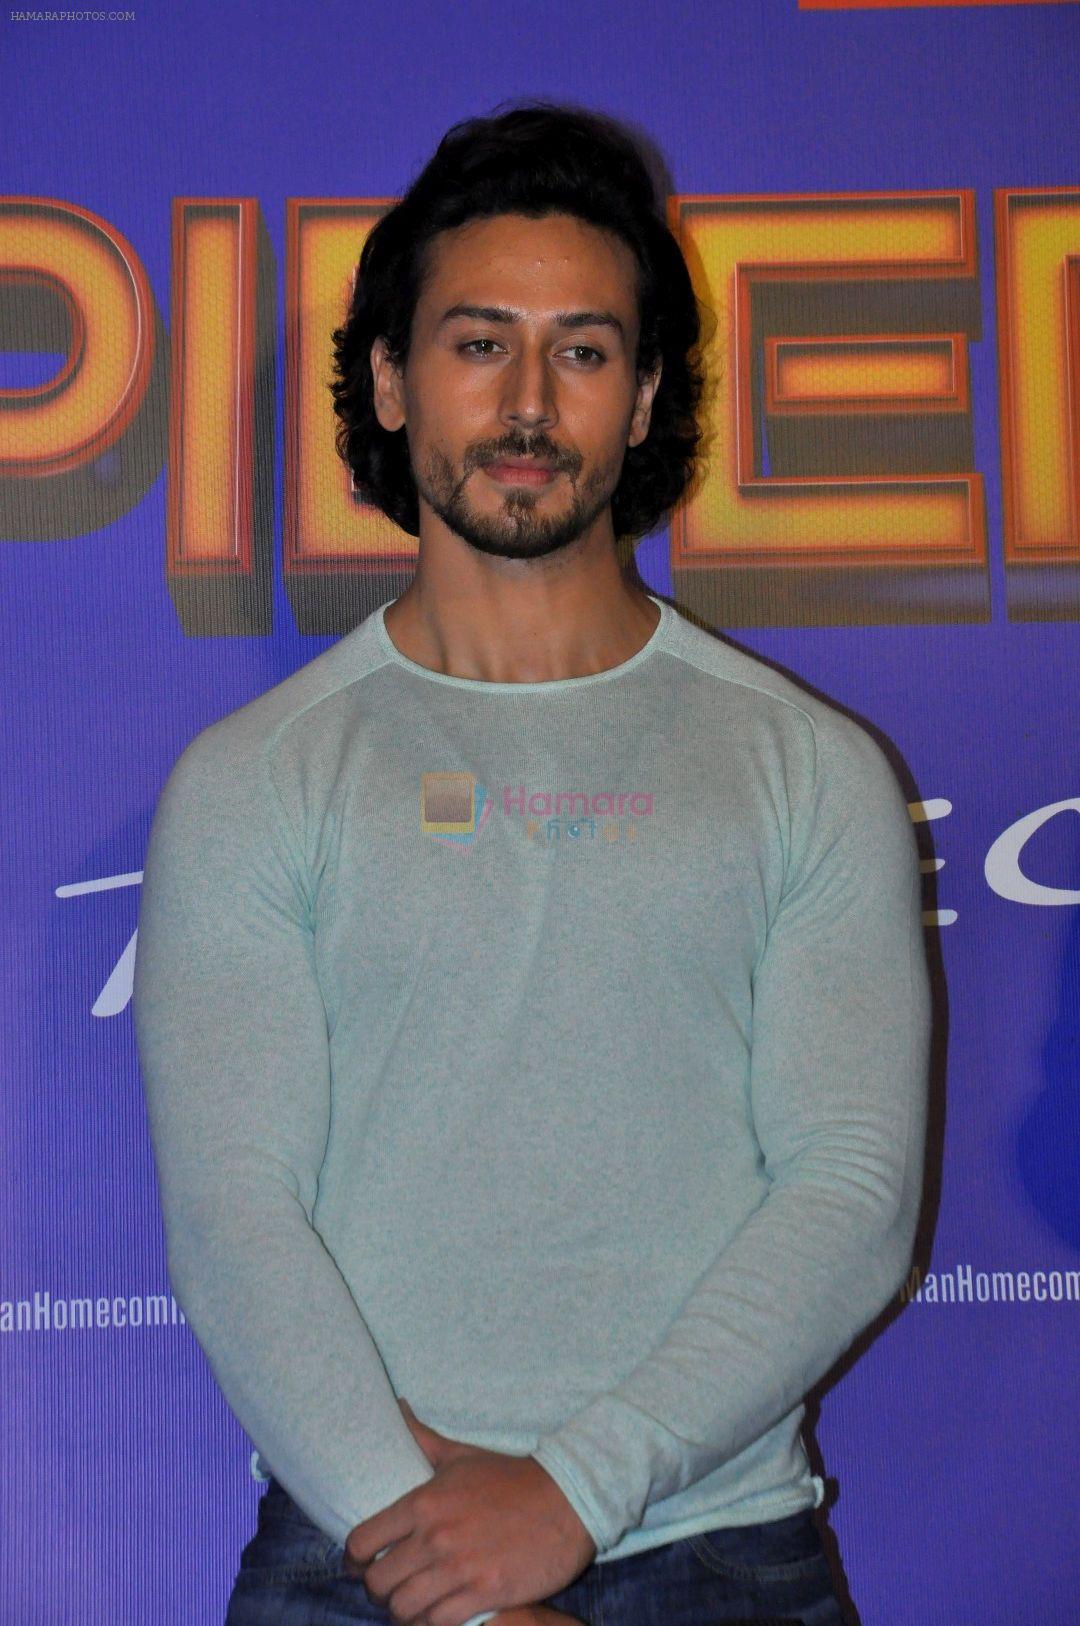 Tiger Shroff at press conference for Spider-Man Homecoming on 27th June 2017